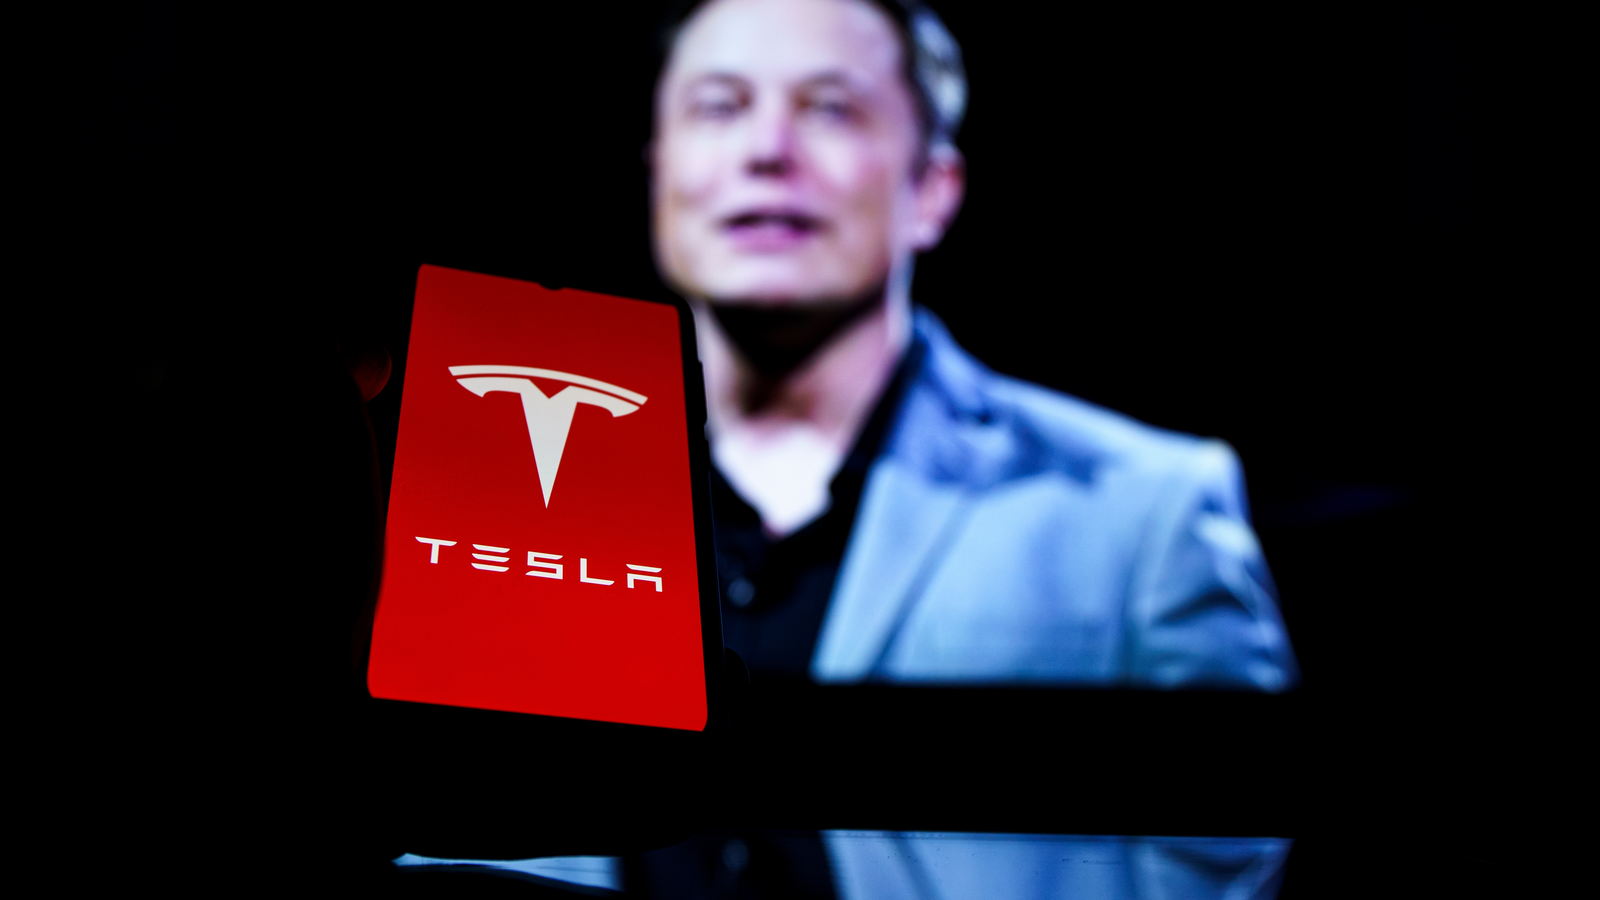 Tesla, Inc. (TSLA Stock Price Predictions) logo displayed on a phone in front of a blurred image of Elon Musk